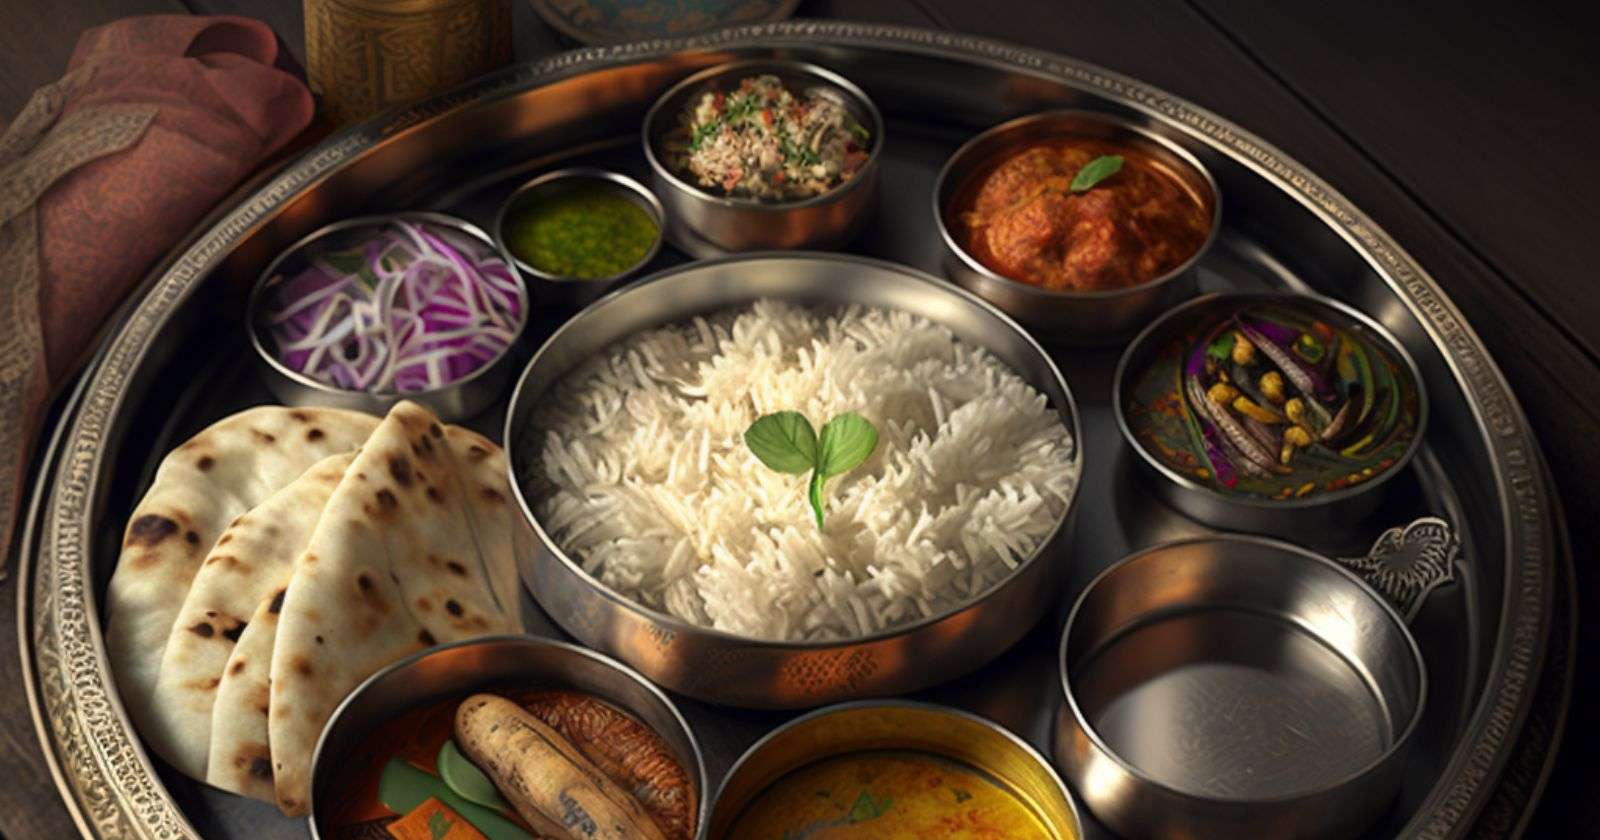 About Indian Food